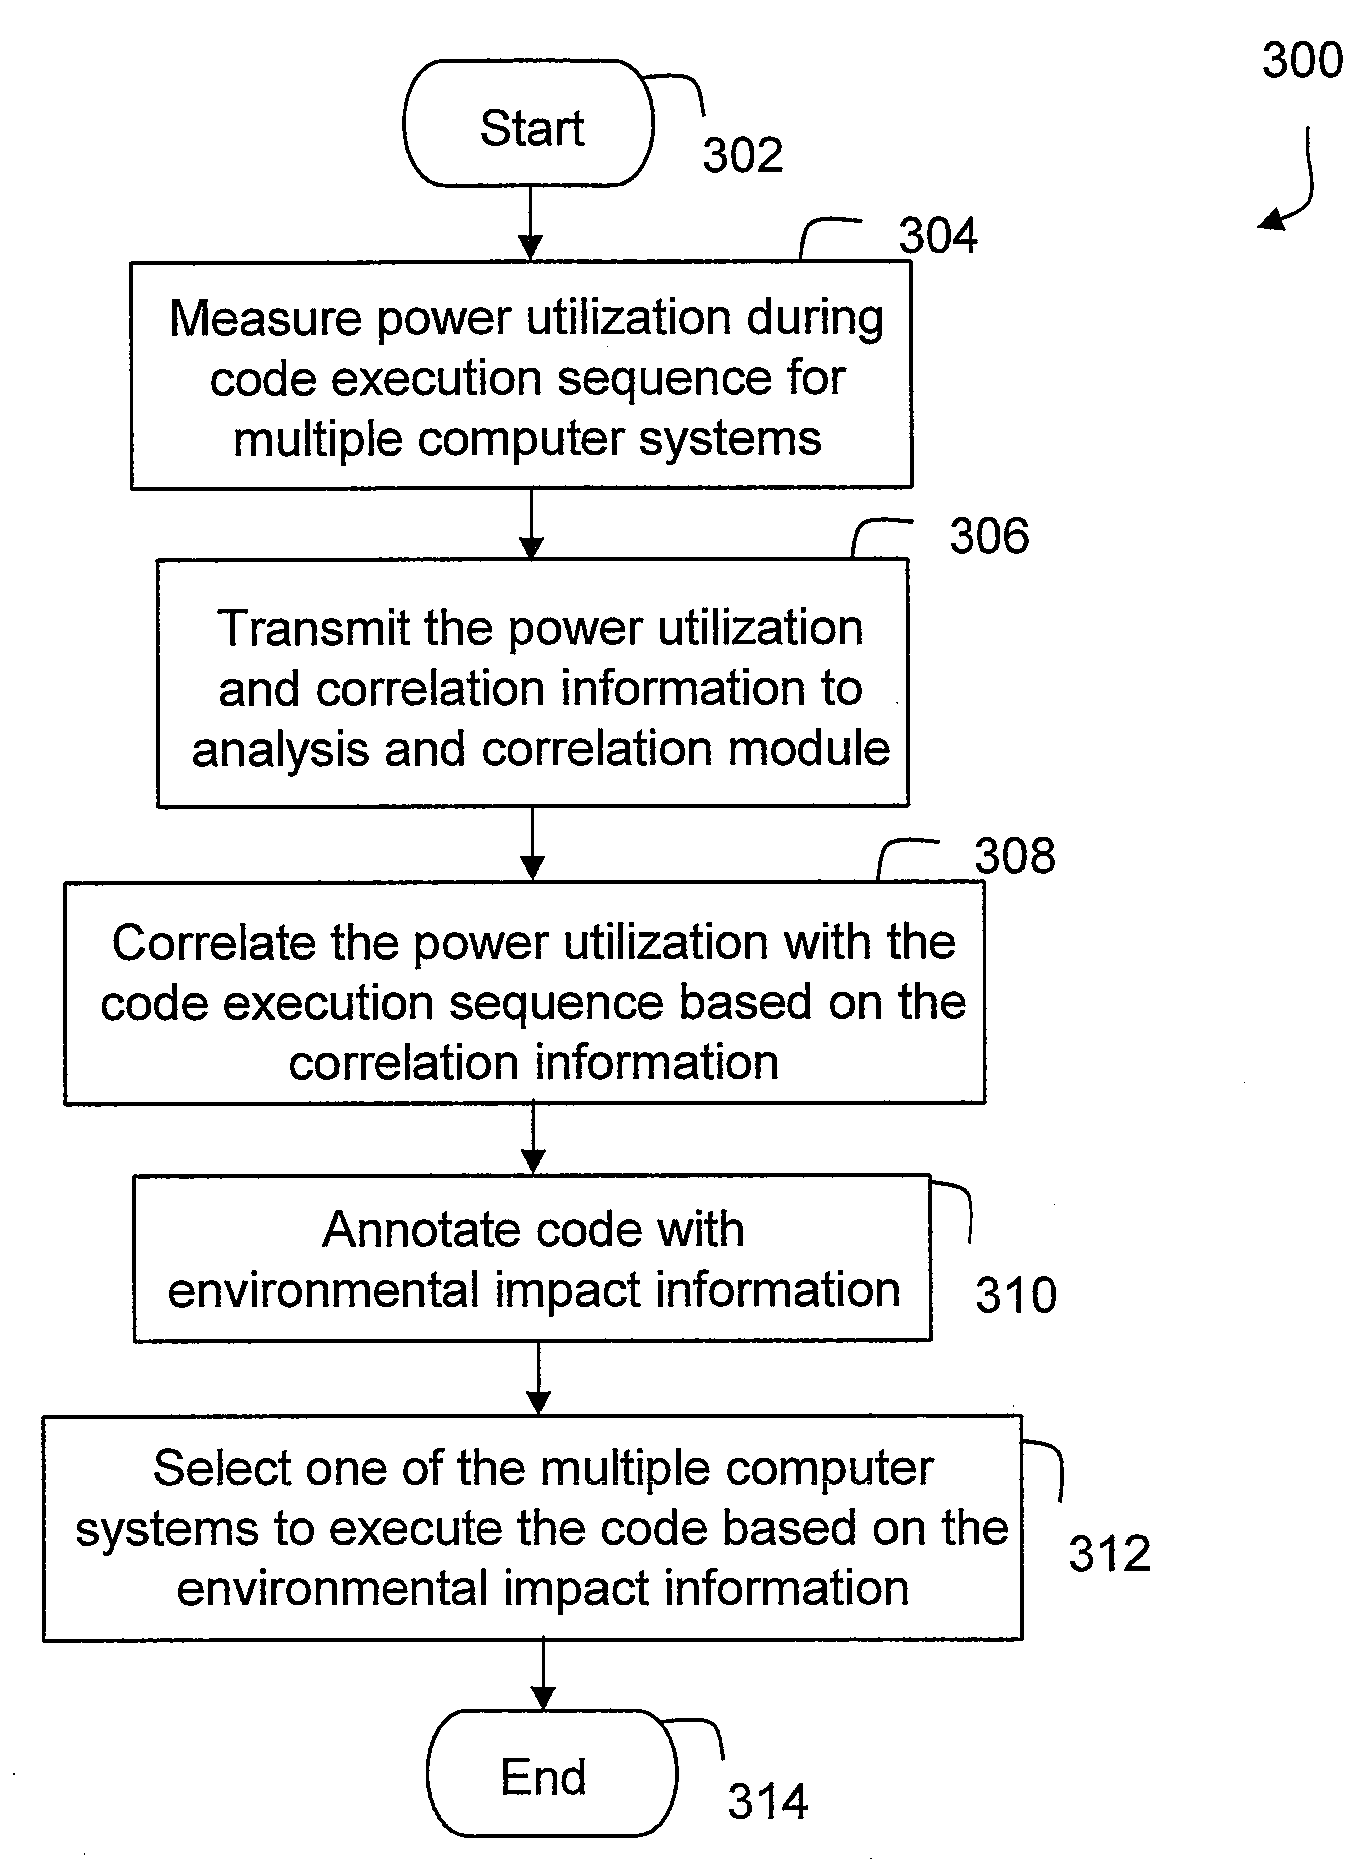 Techniques for Providing Environmental Impact Information Associated With Code